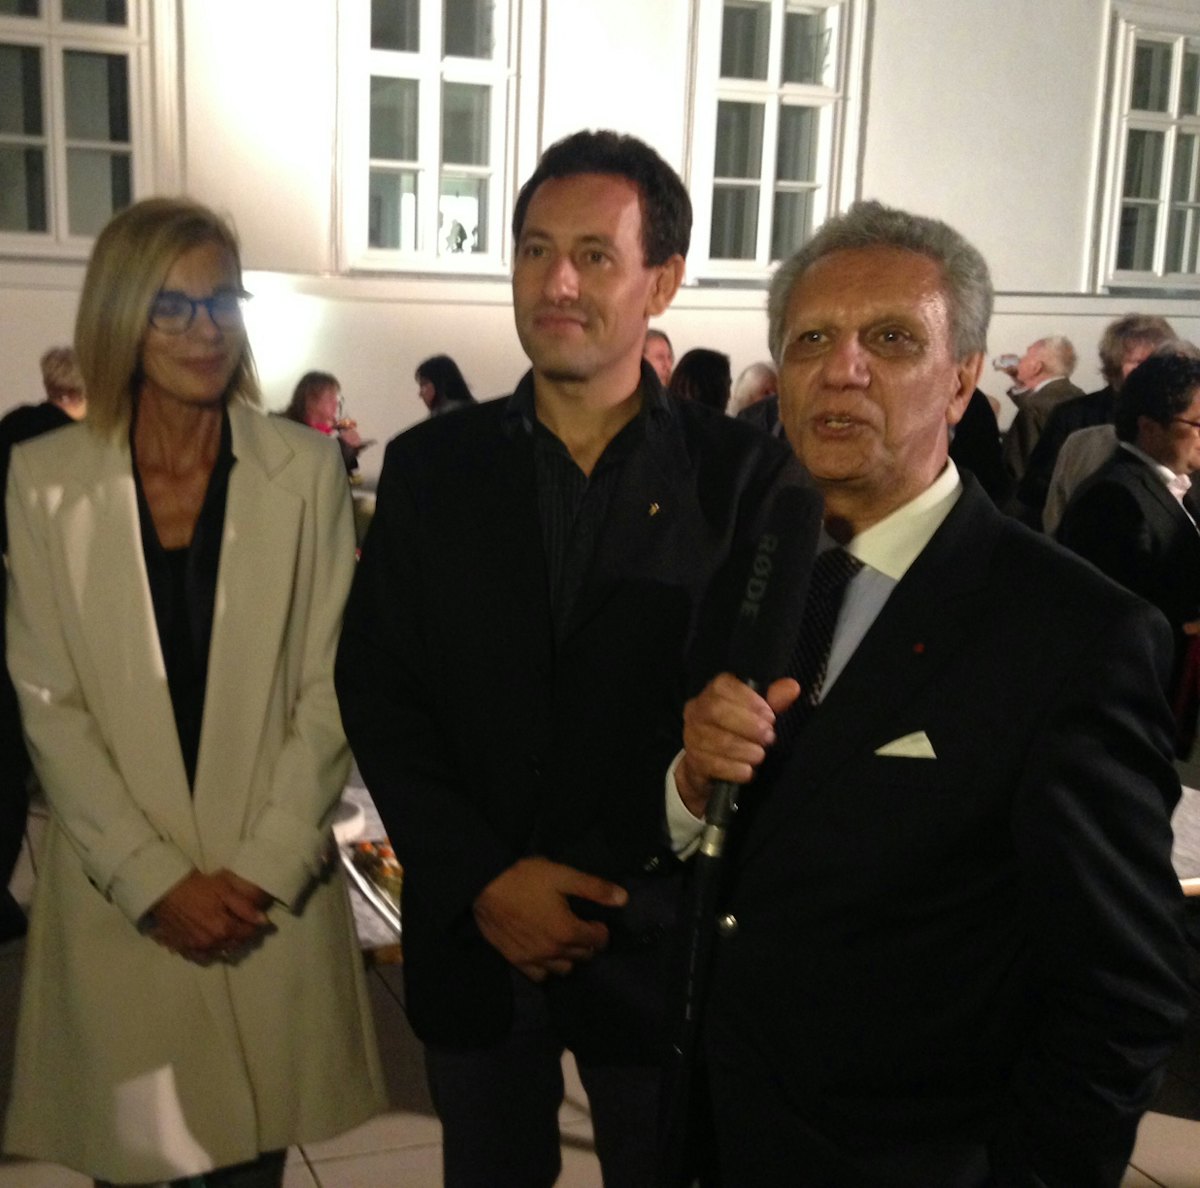 Left to right: Representative from the Catholic Church Eva Gorgosilich, Evangelical Priest Jan Magyar, and composer Bijan Khadem-Missagh at the celebrations in Bruck.